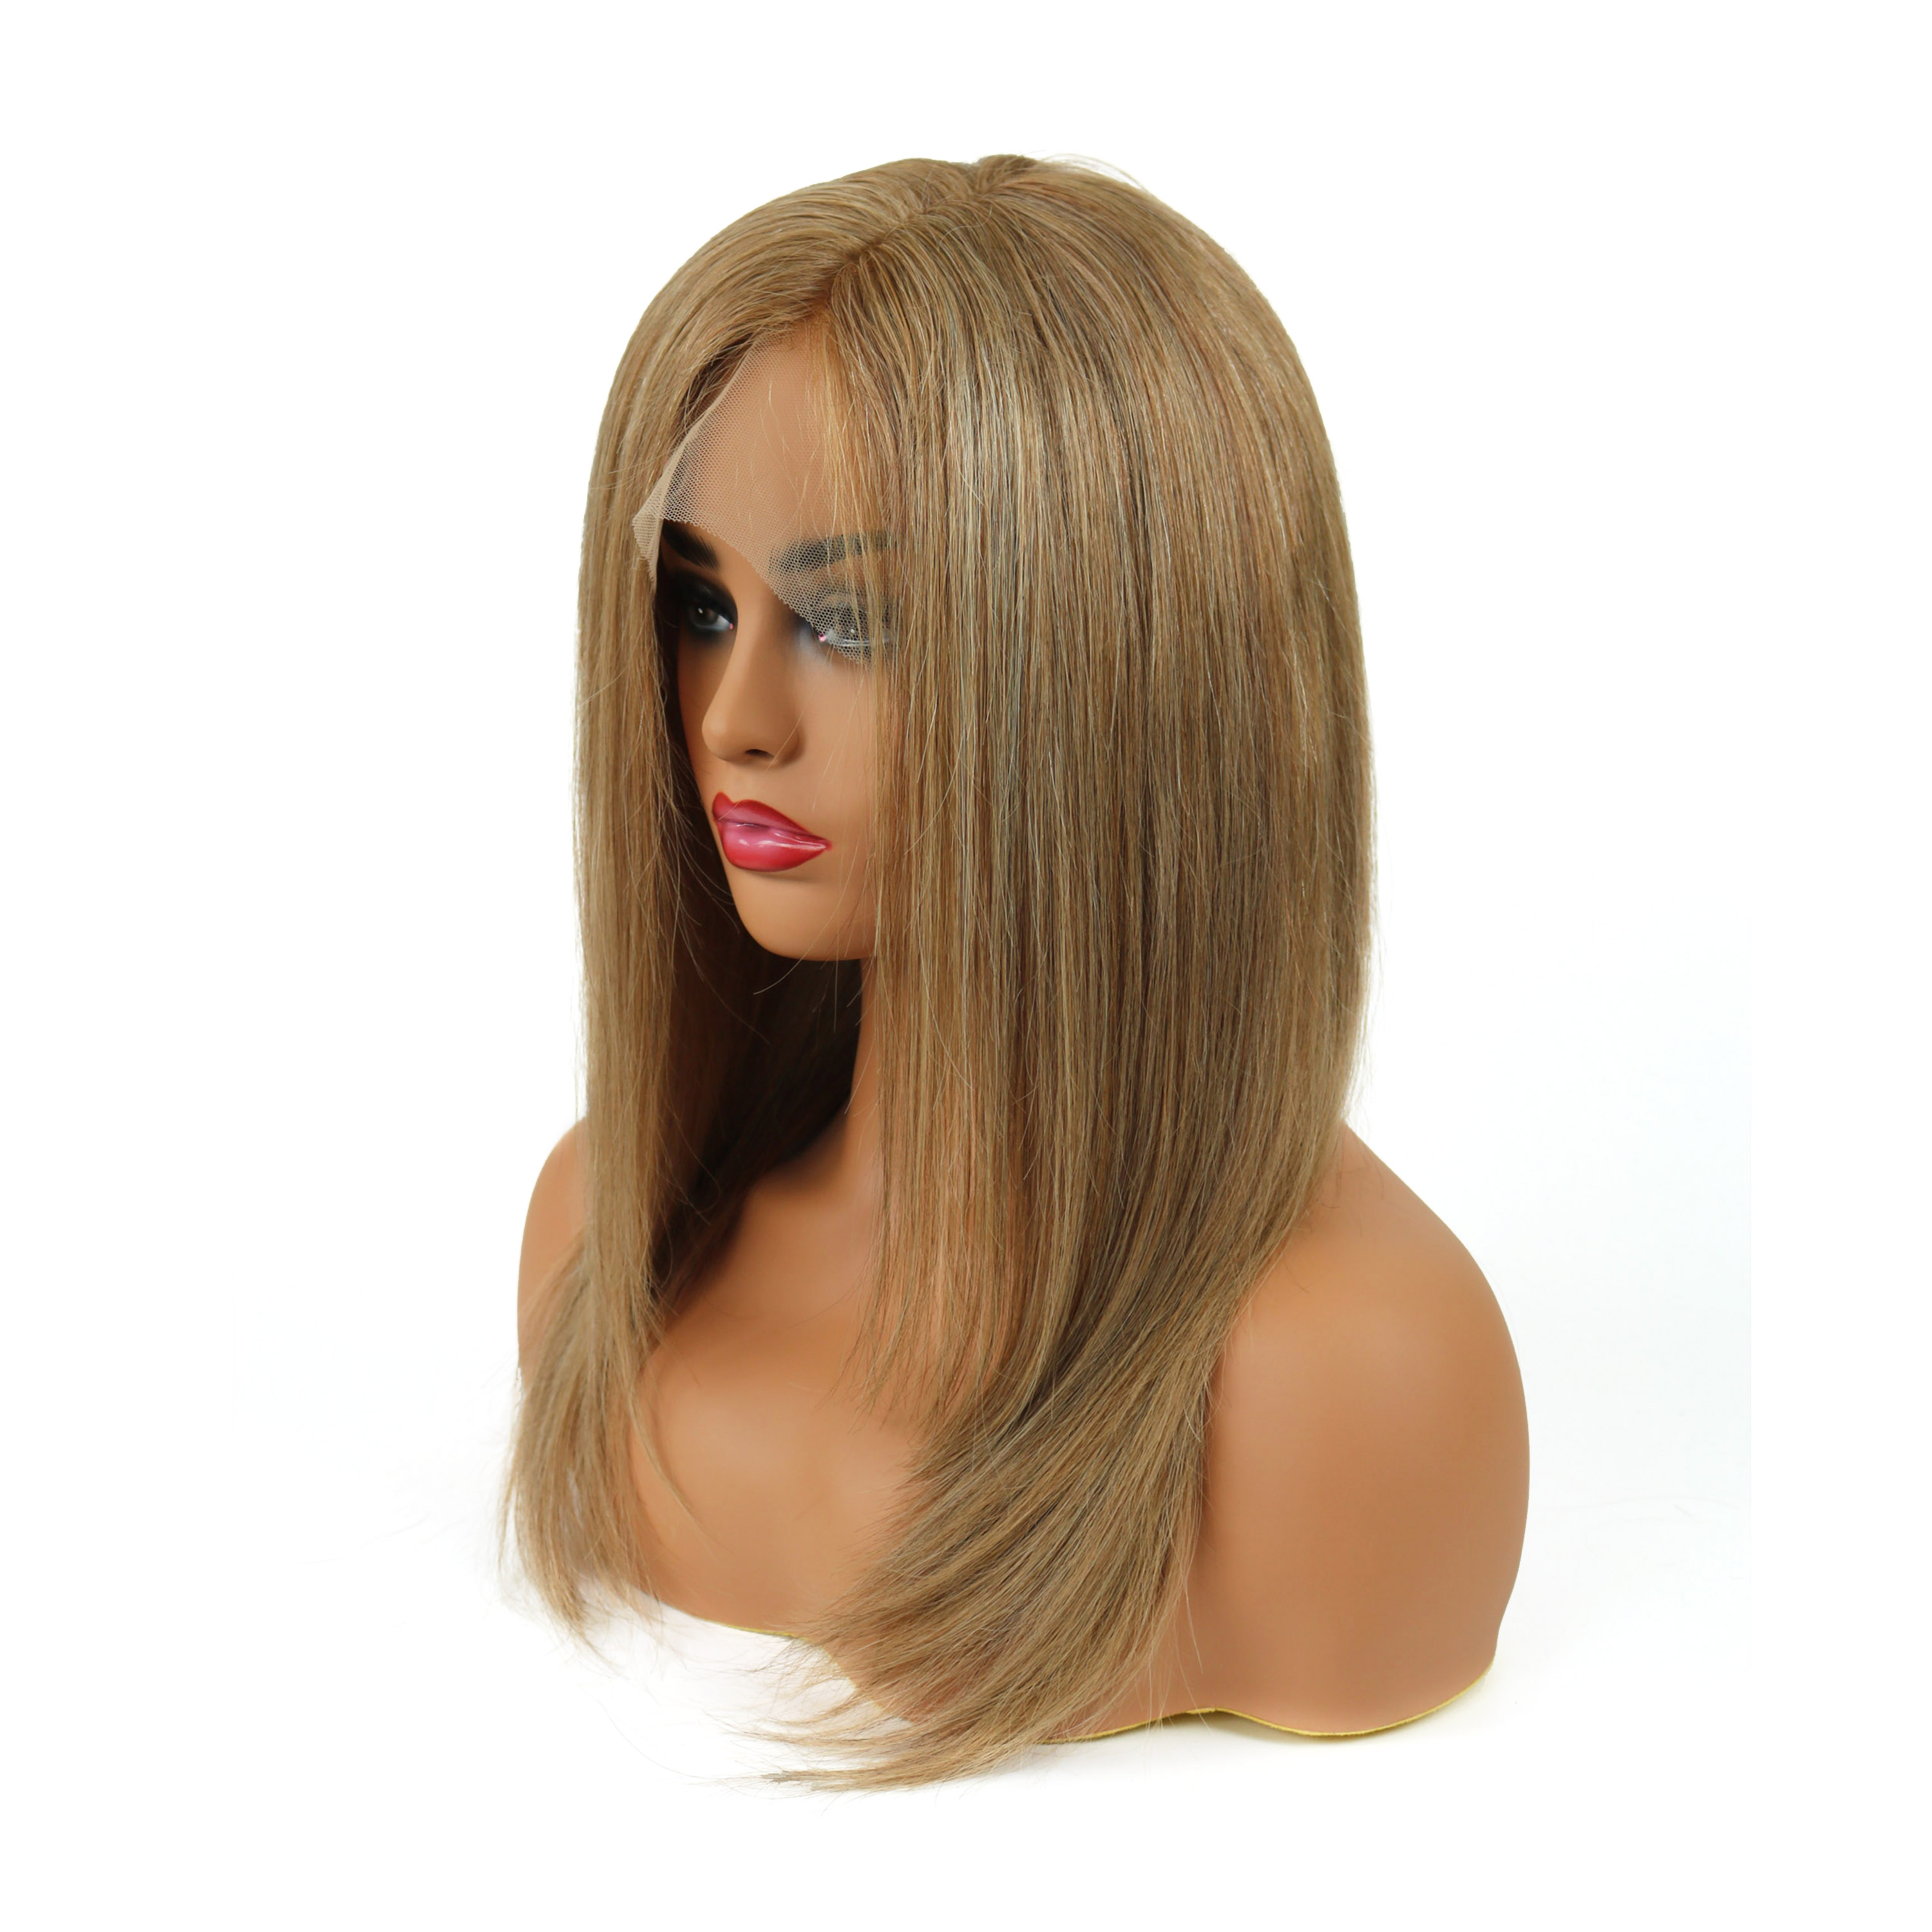 Youthful Mixed Color Medium Straight Full Lace Wig 100% Human Hair 16 Inches